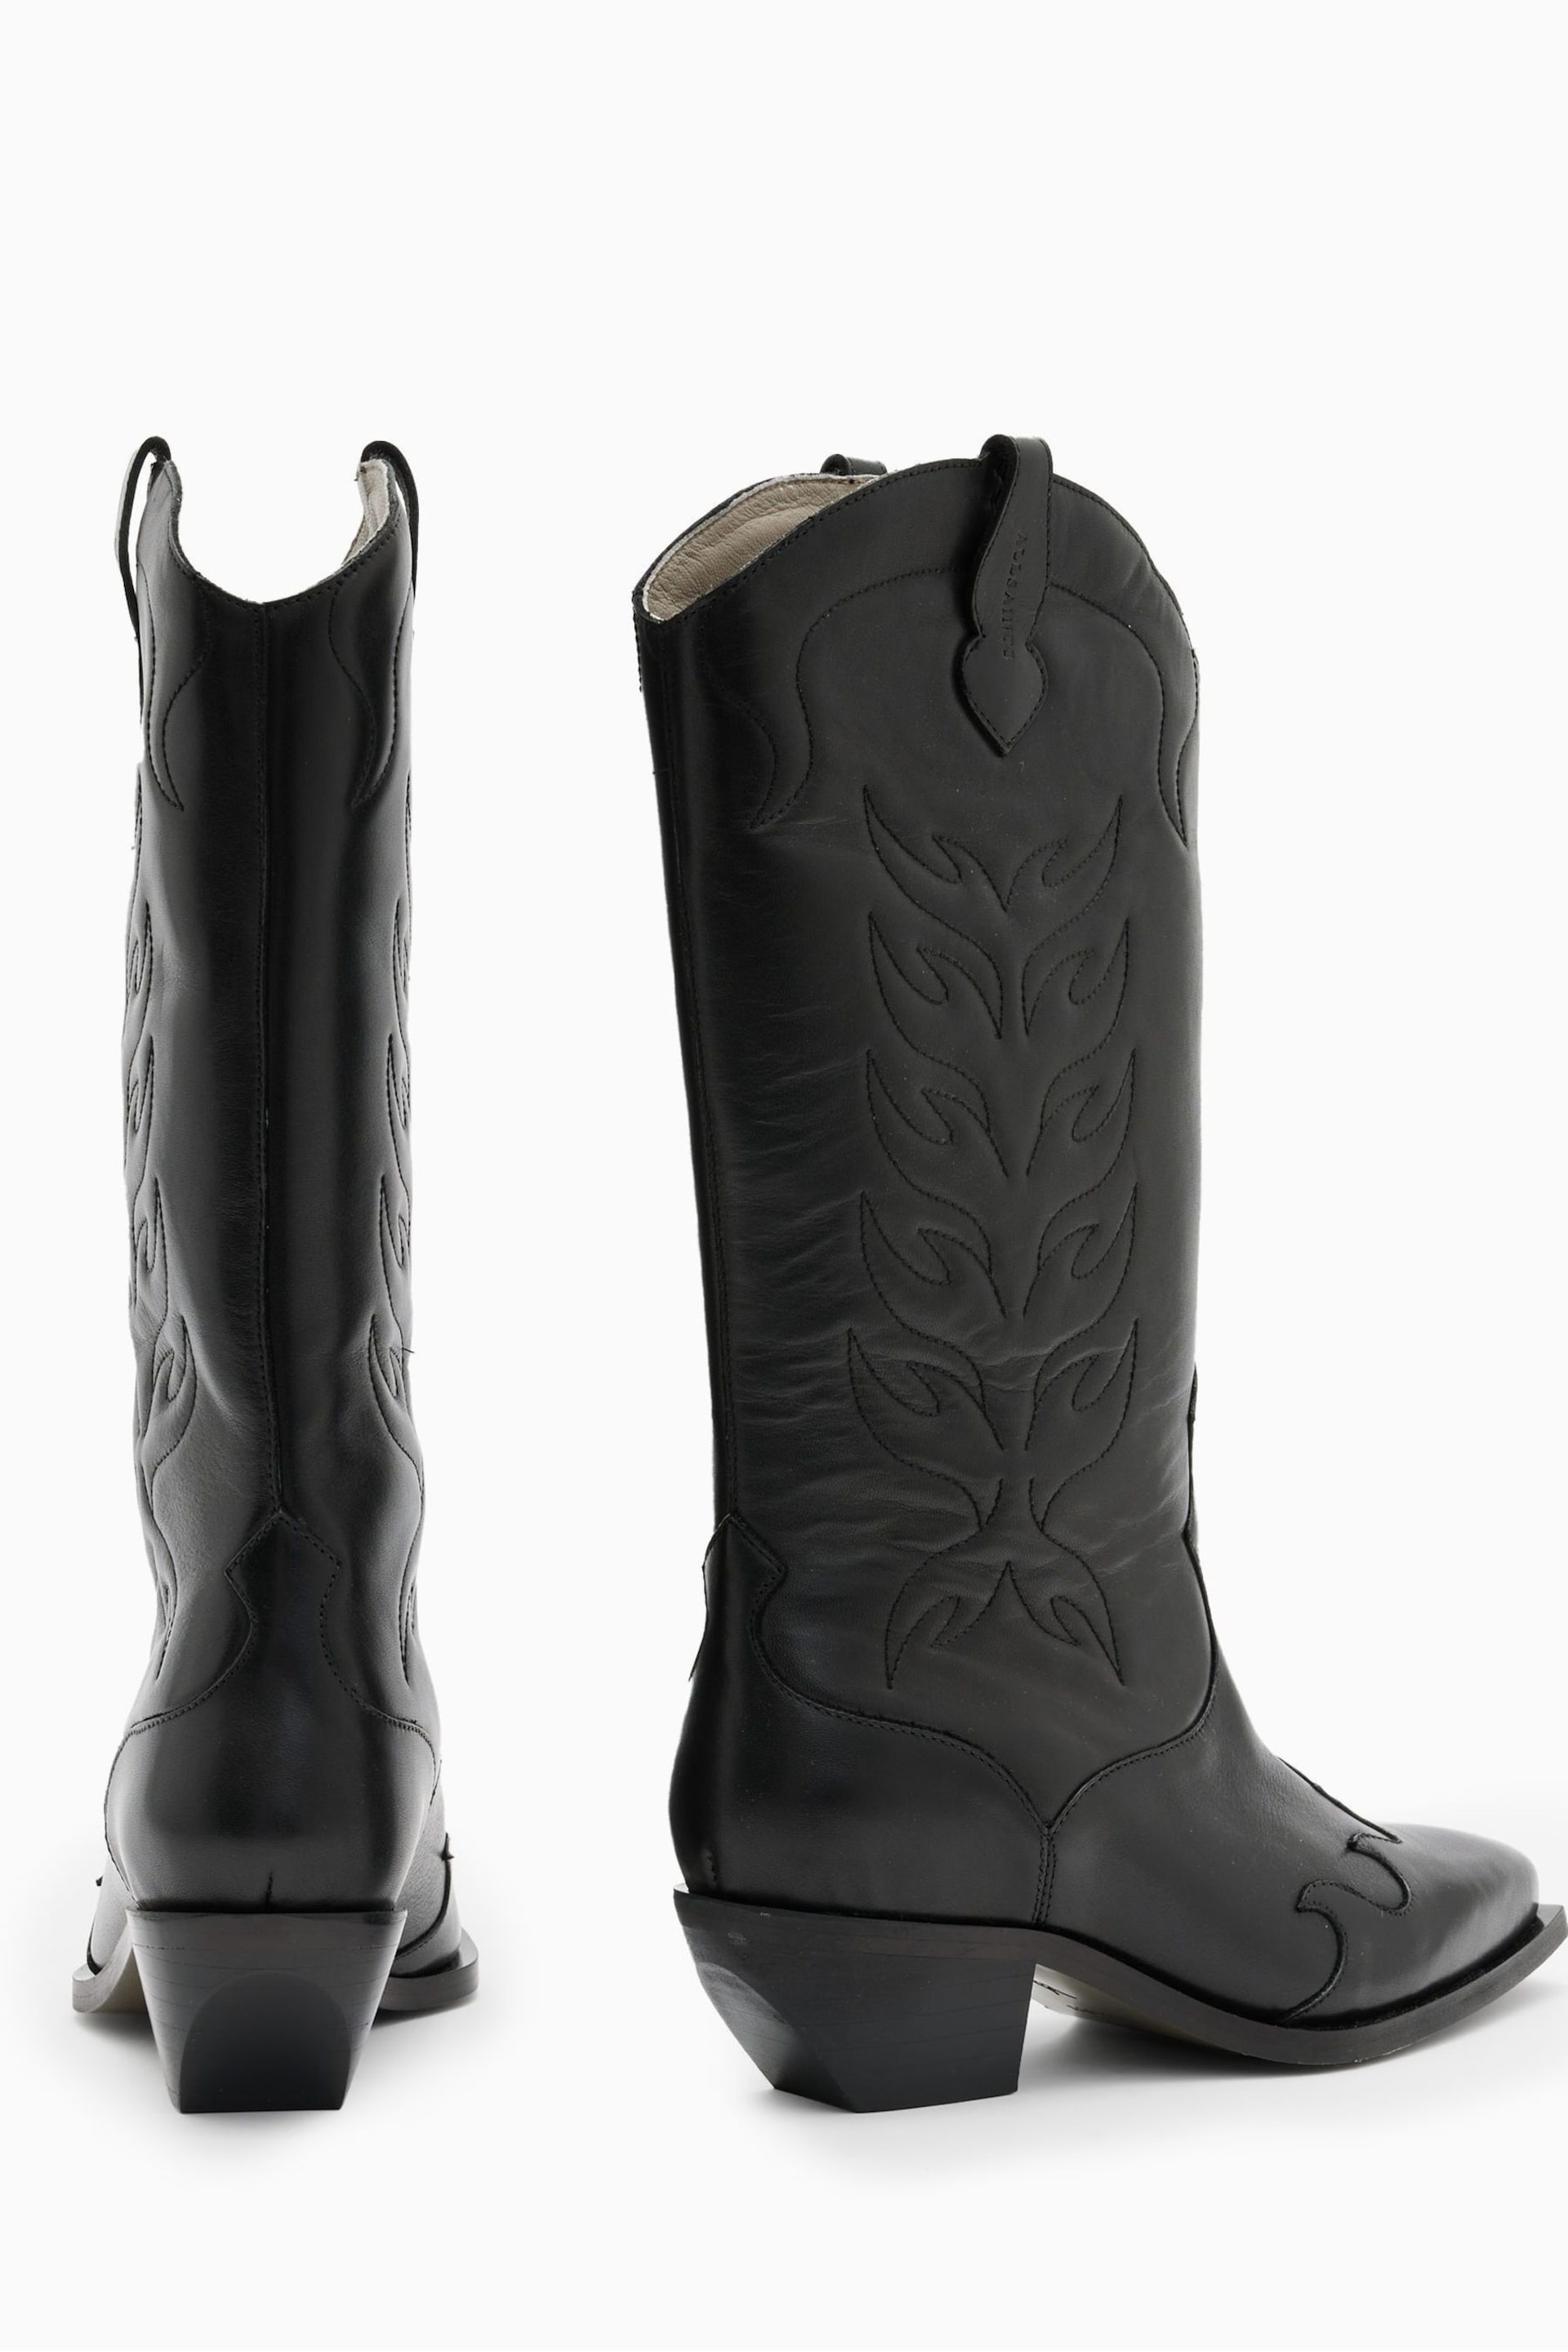 AllSaints Black Dolly Boots - Image 4 of 6